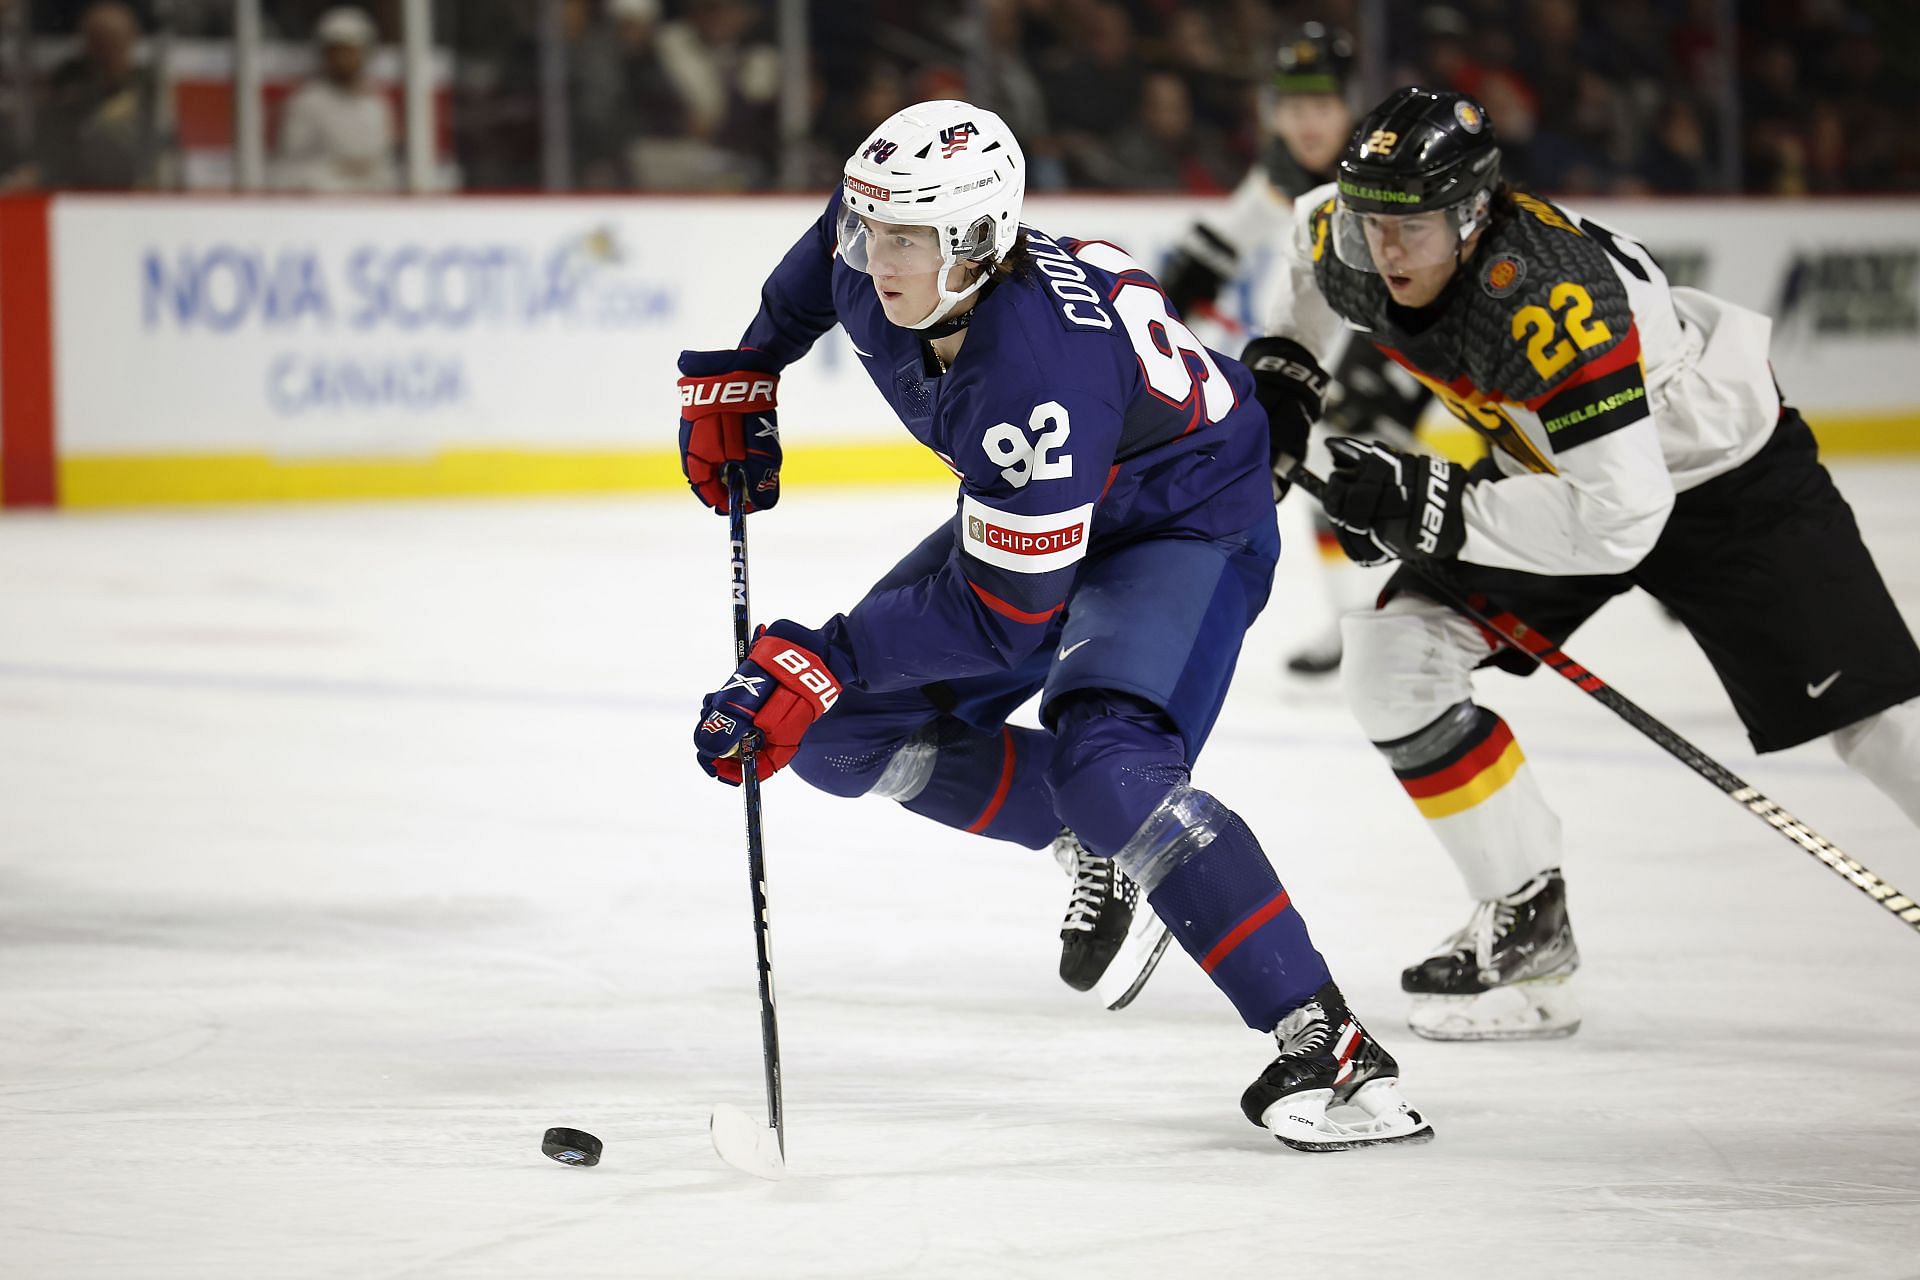 Logan Cooley #92 of Team USA skates the puck ahead of Philipp Bidoul #22 of Team Germany in the second period in a quarterfinal game of the 2023 IIHF World Junior Championship at Avenir Centre on January 2, 2023 in Moncton, Canada. (Photo by Dale Preston/Getty Images)